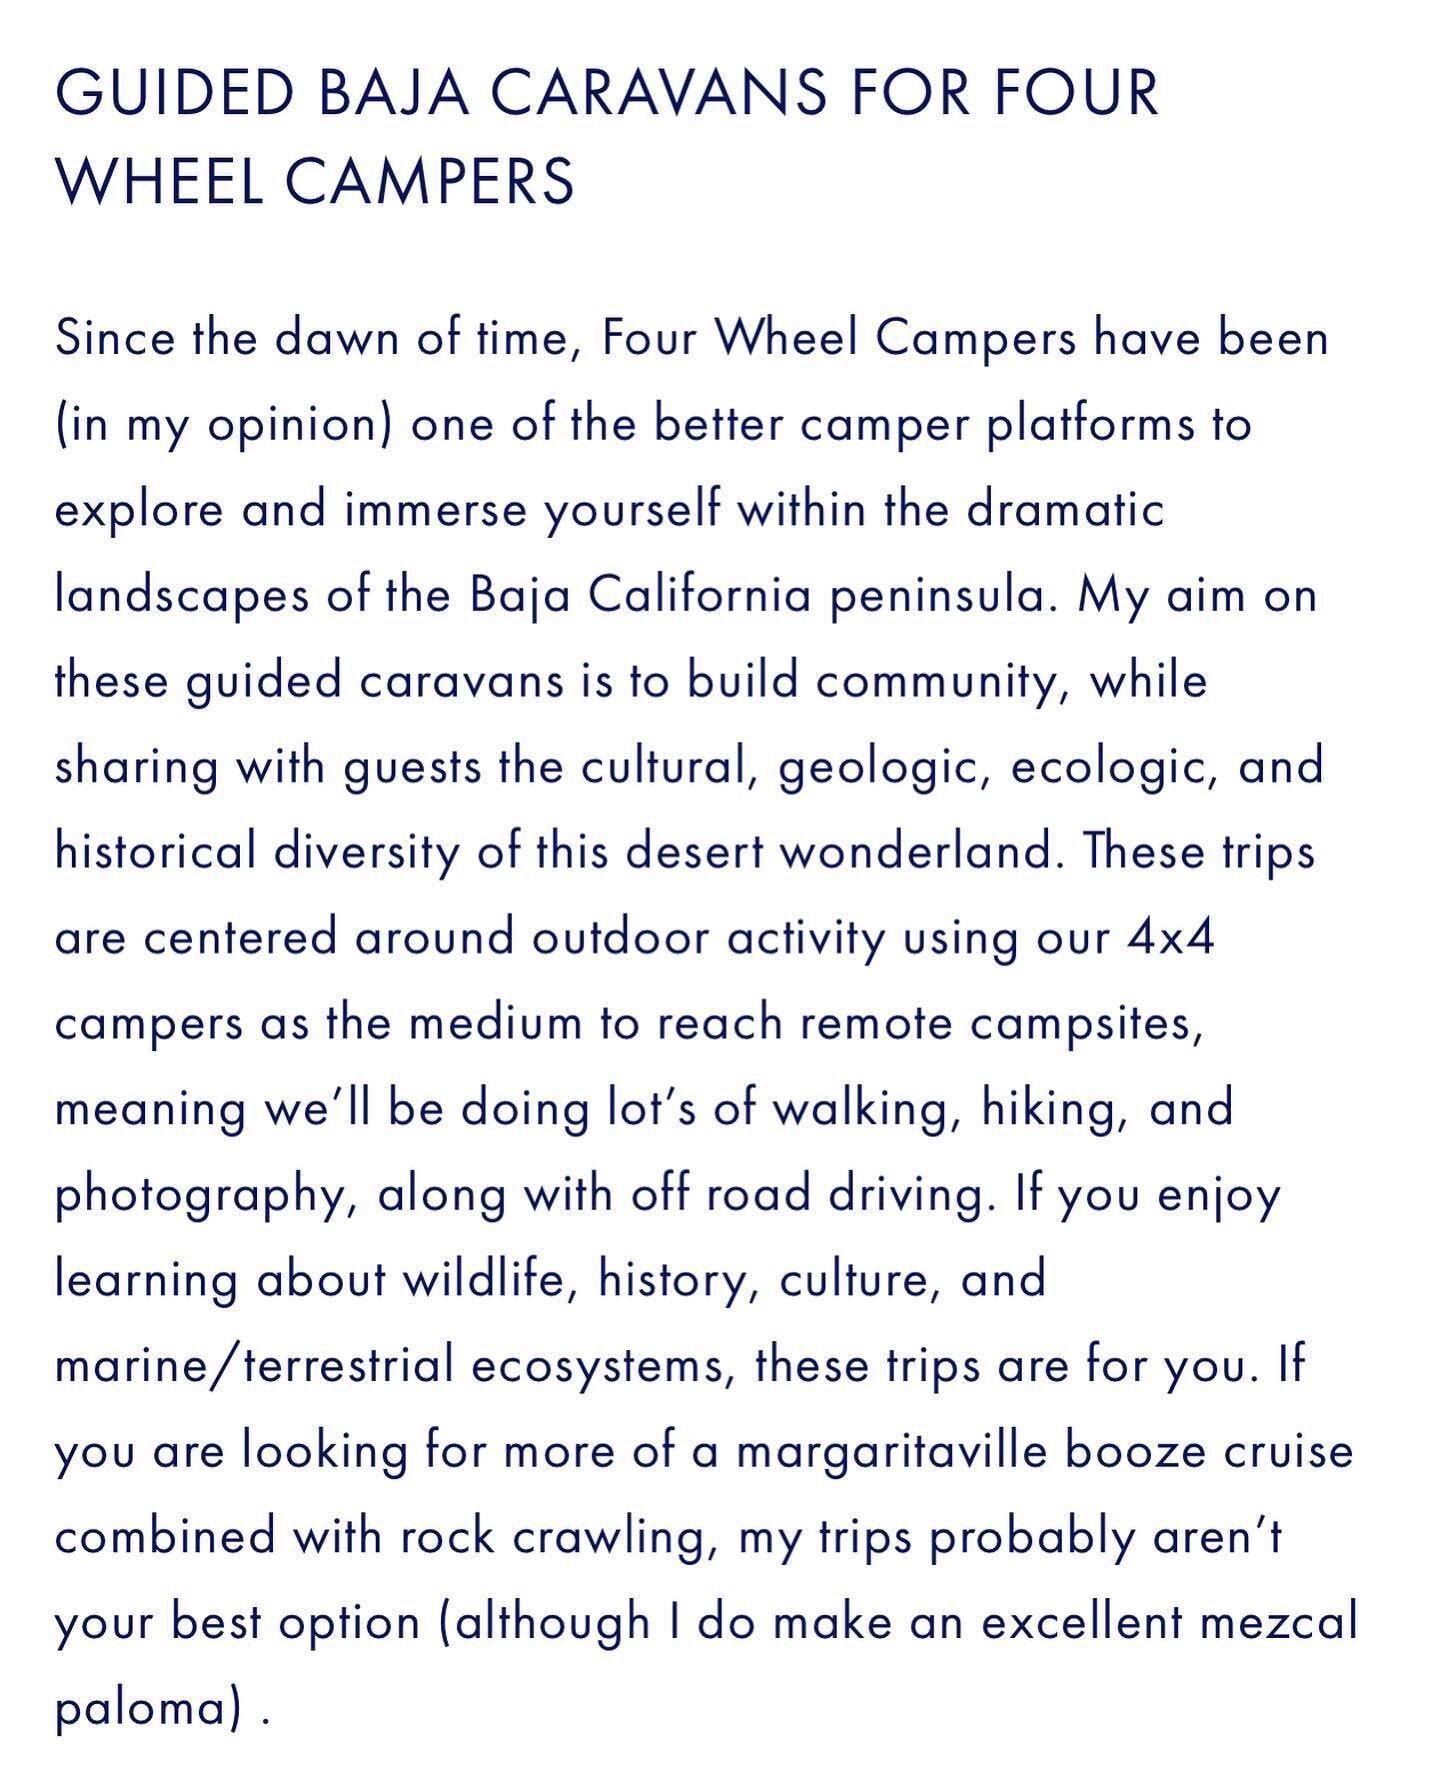 This May I will be operating two @fourwheelcampers Baja California natural history expeditions where we&rsquo;ll be driving 10 days from San Diego to Cabo San Lucas exploring mangrove lagoons, ranches, sky island mountain ranges, and desert coastline